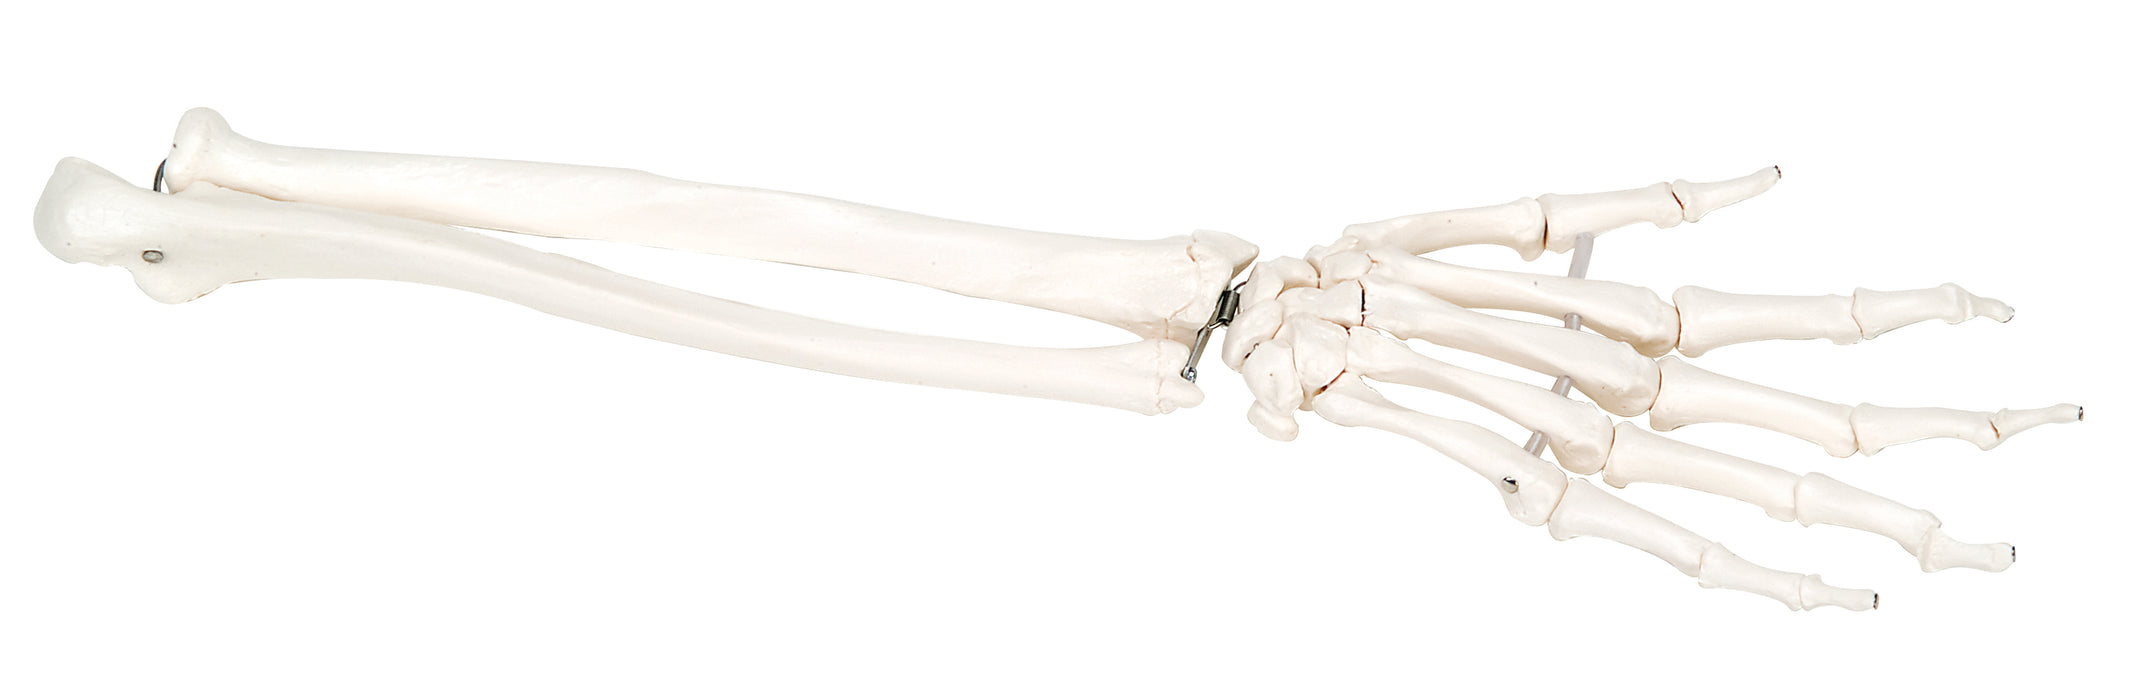 3B Scientific A40/3 Anatomical Model - Loose Bones, Hand Skeleton With Ulna And Radius, Left (Bungee) - Includes 3B Smart Anatomy